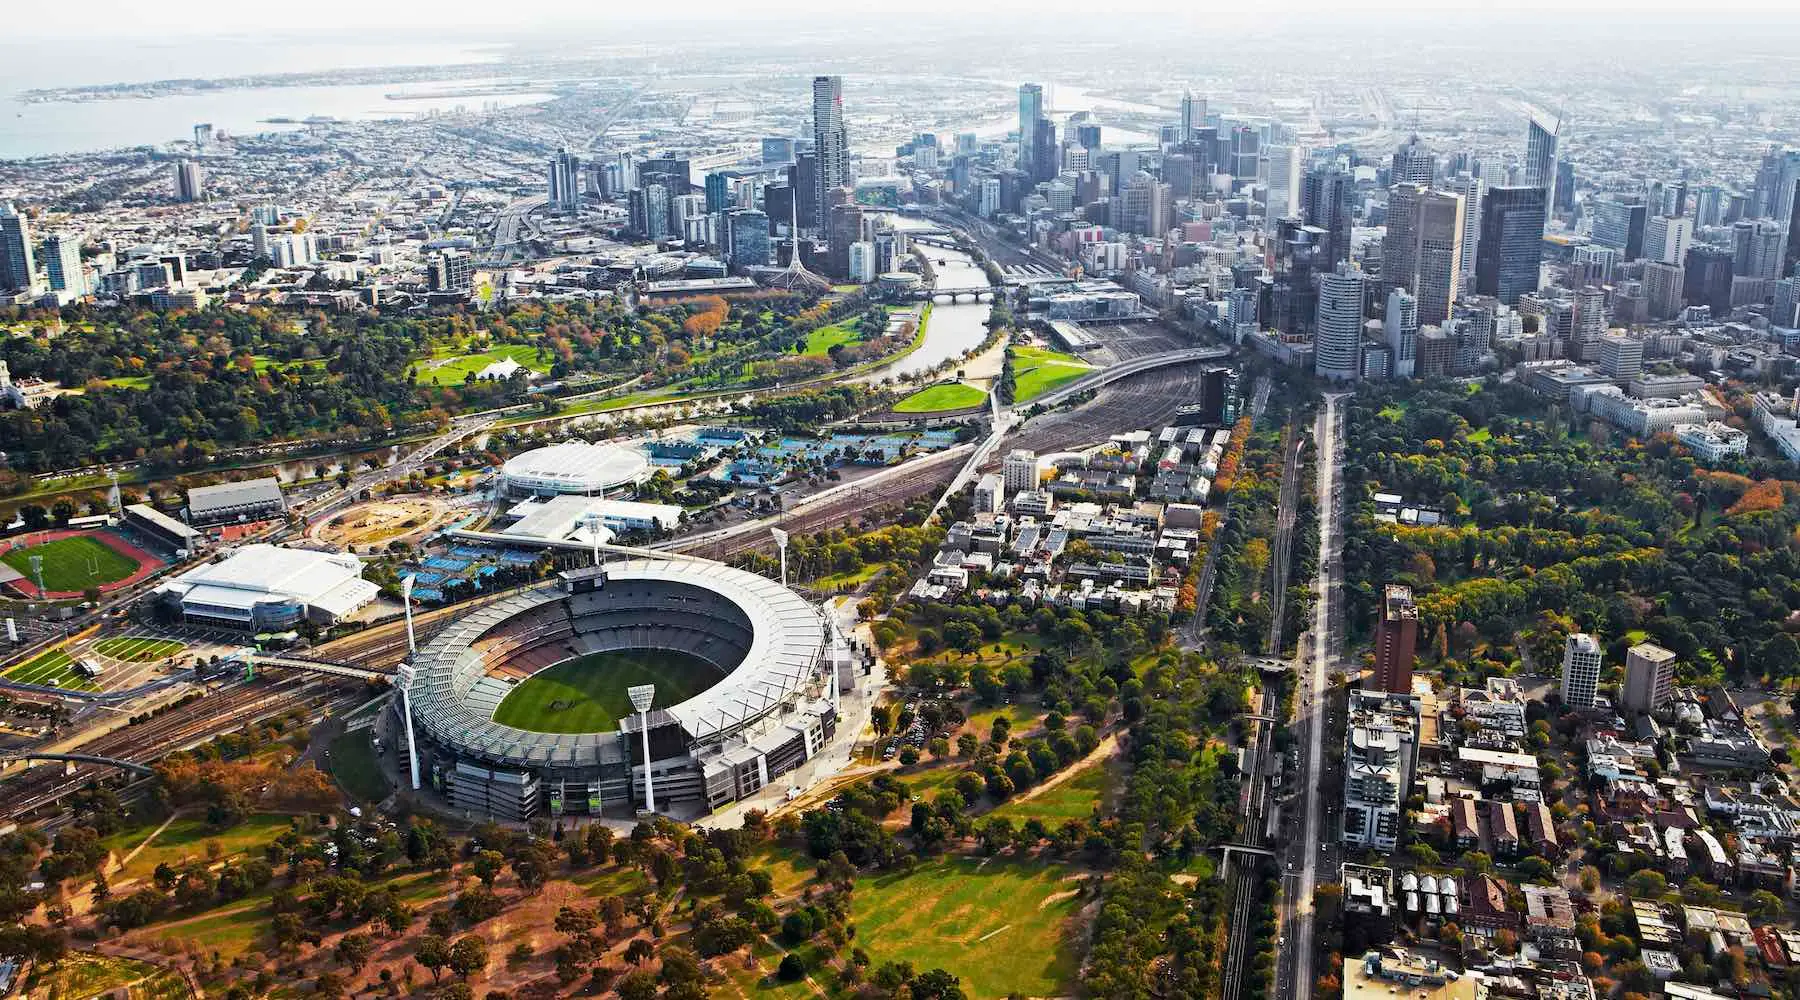 Ariel view over Melbourne Cricket Ground, Yarra River and the city of Melbourne